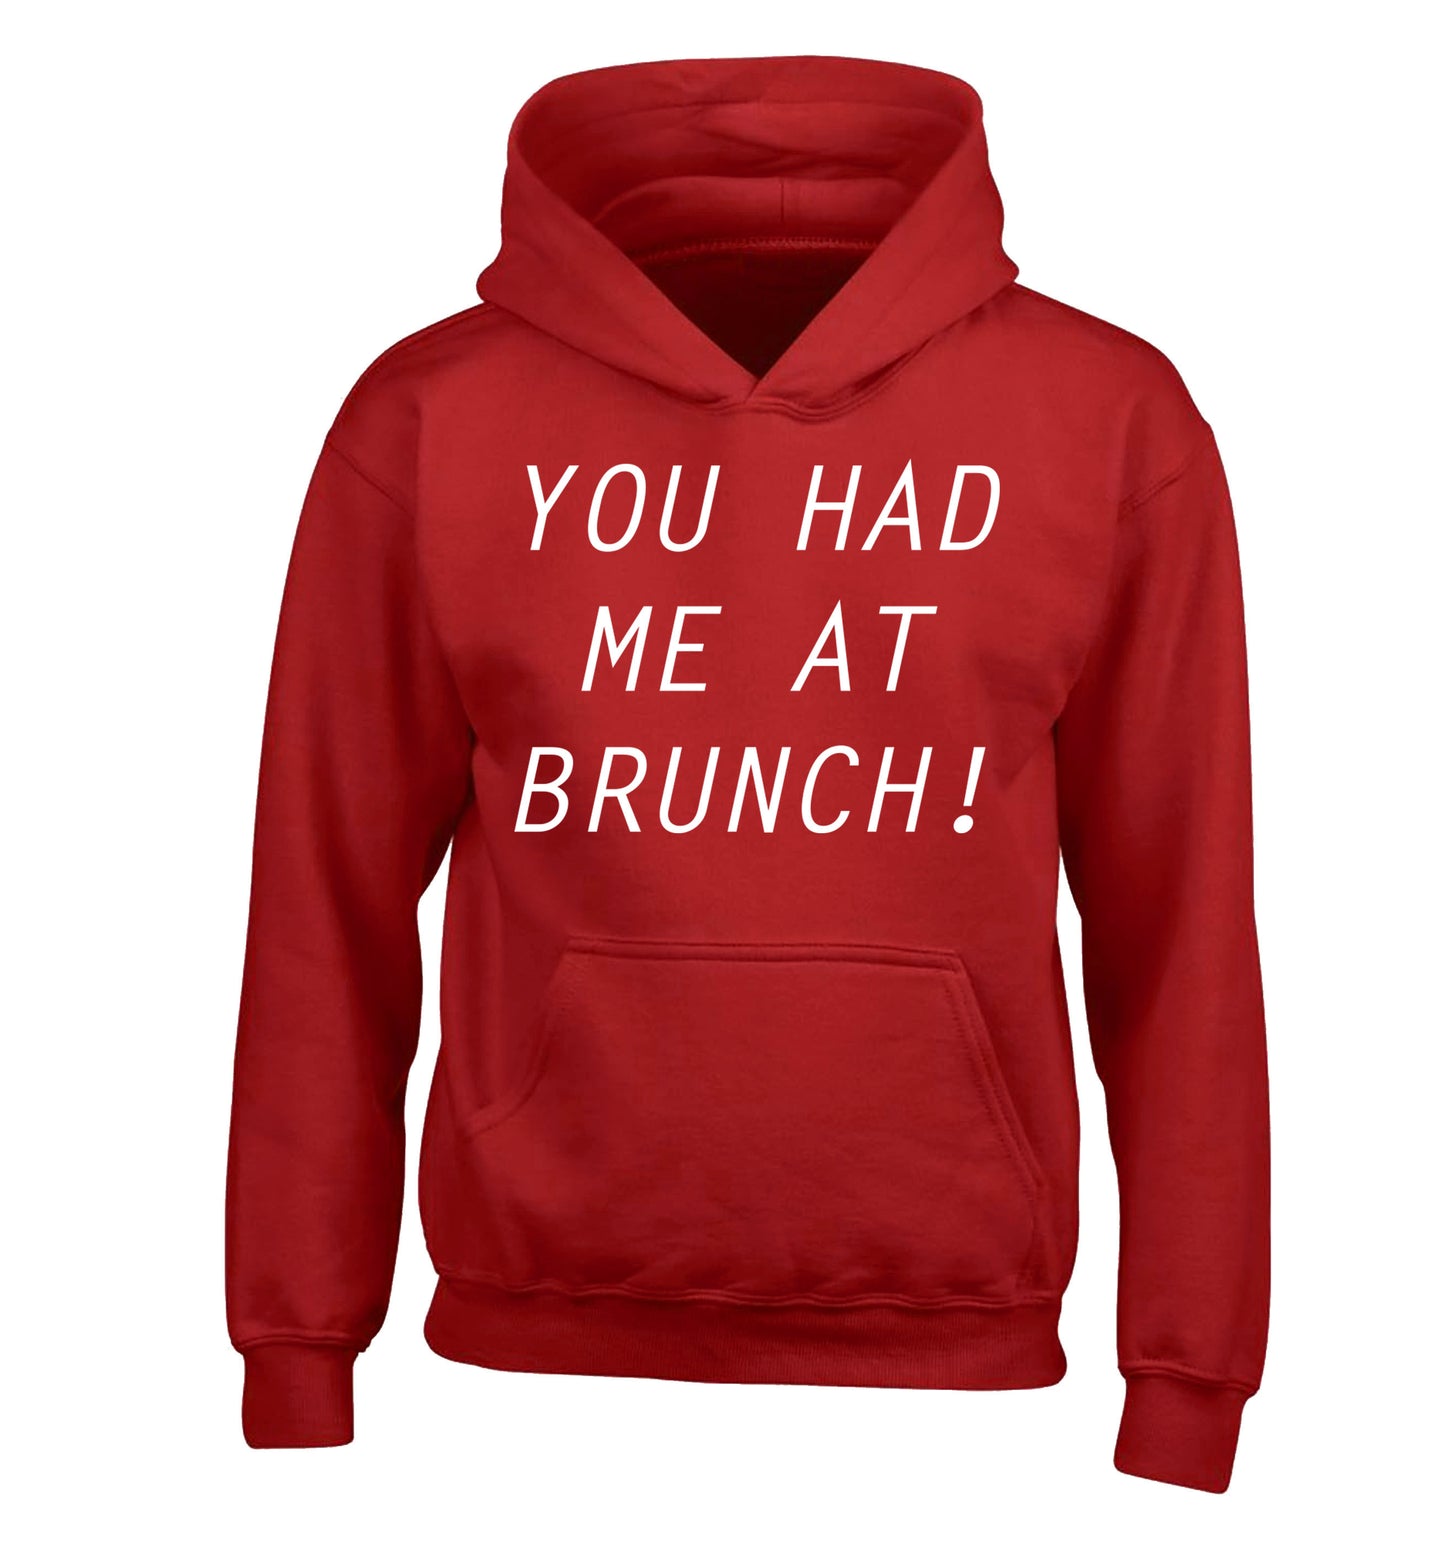 You had me at brunch children's blue sweater 12-14 Years